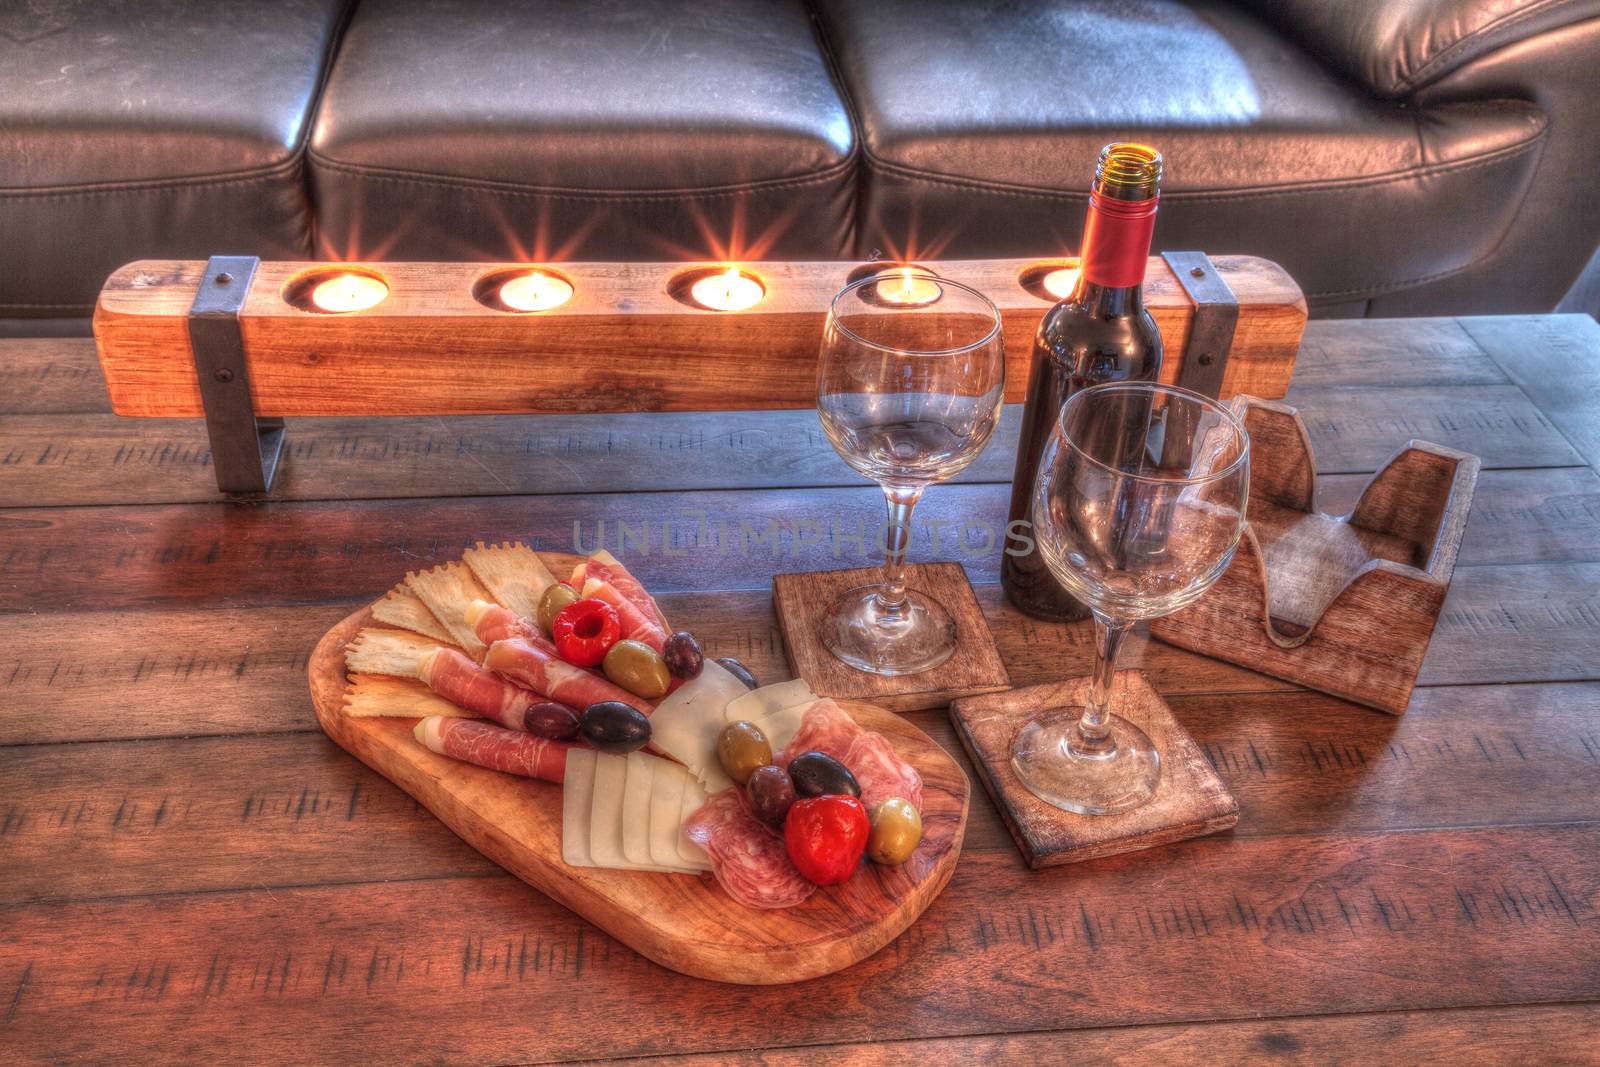 Red wine with Charcuterie board on rustic wood with candles behind a spread of prosciutto panino, mozzarella cheese, Genoa salami, Fontina cheese and artisanal crackers.